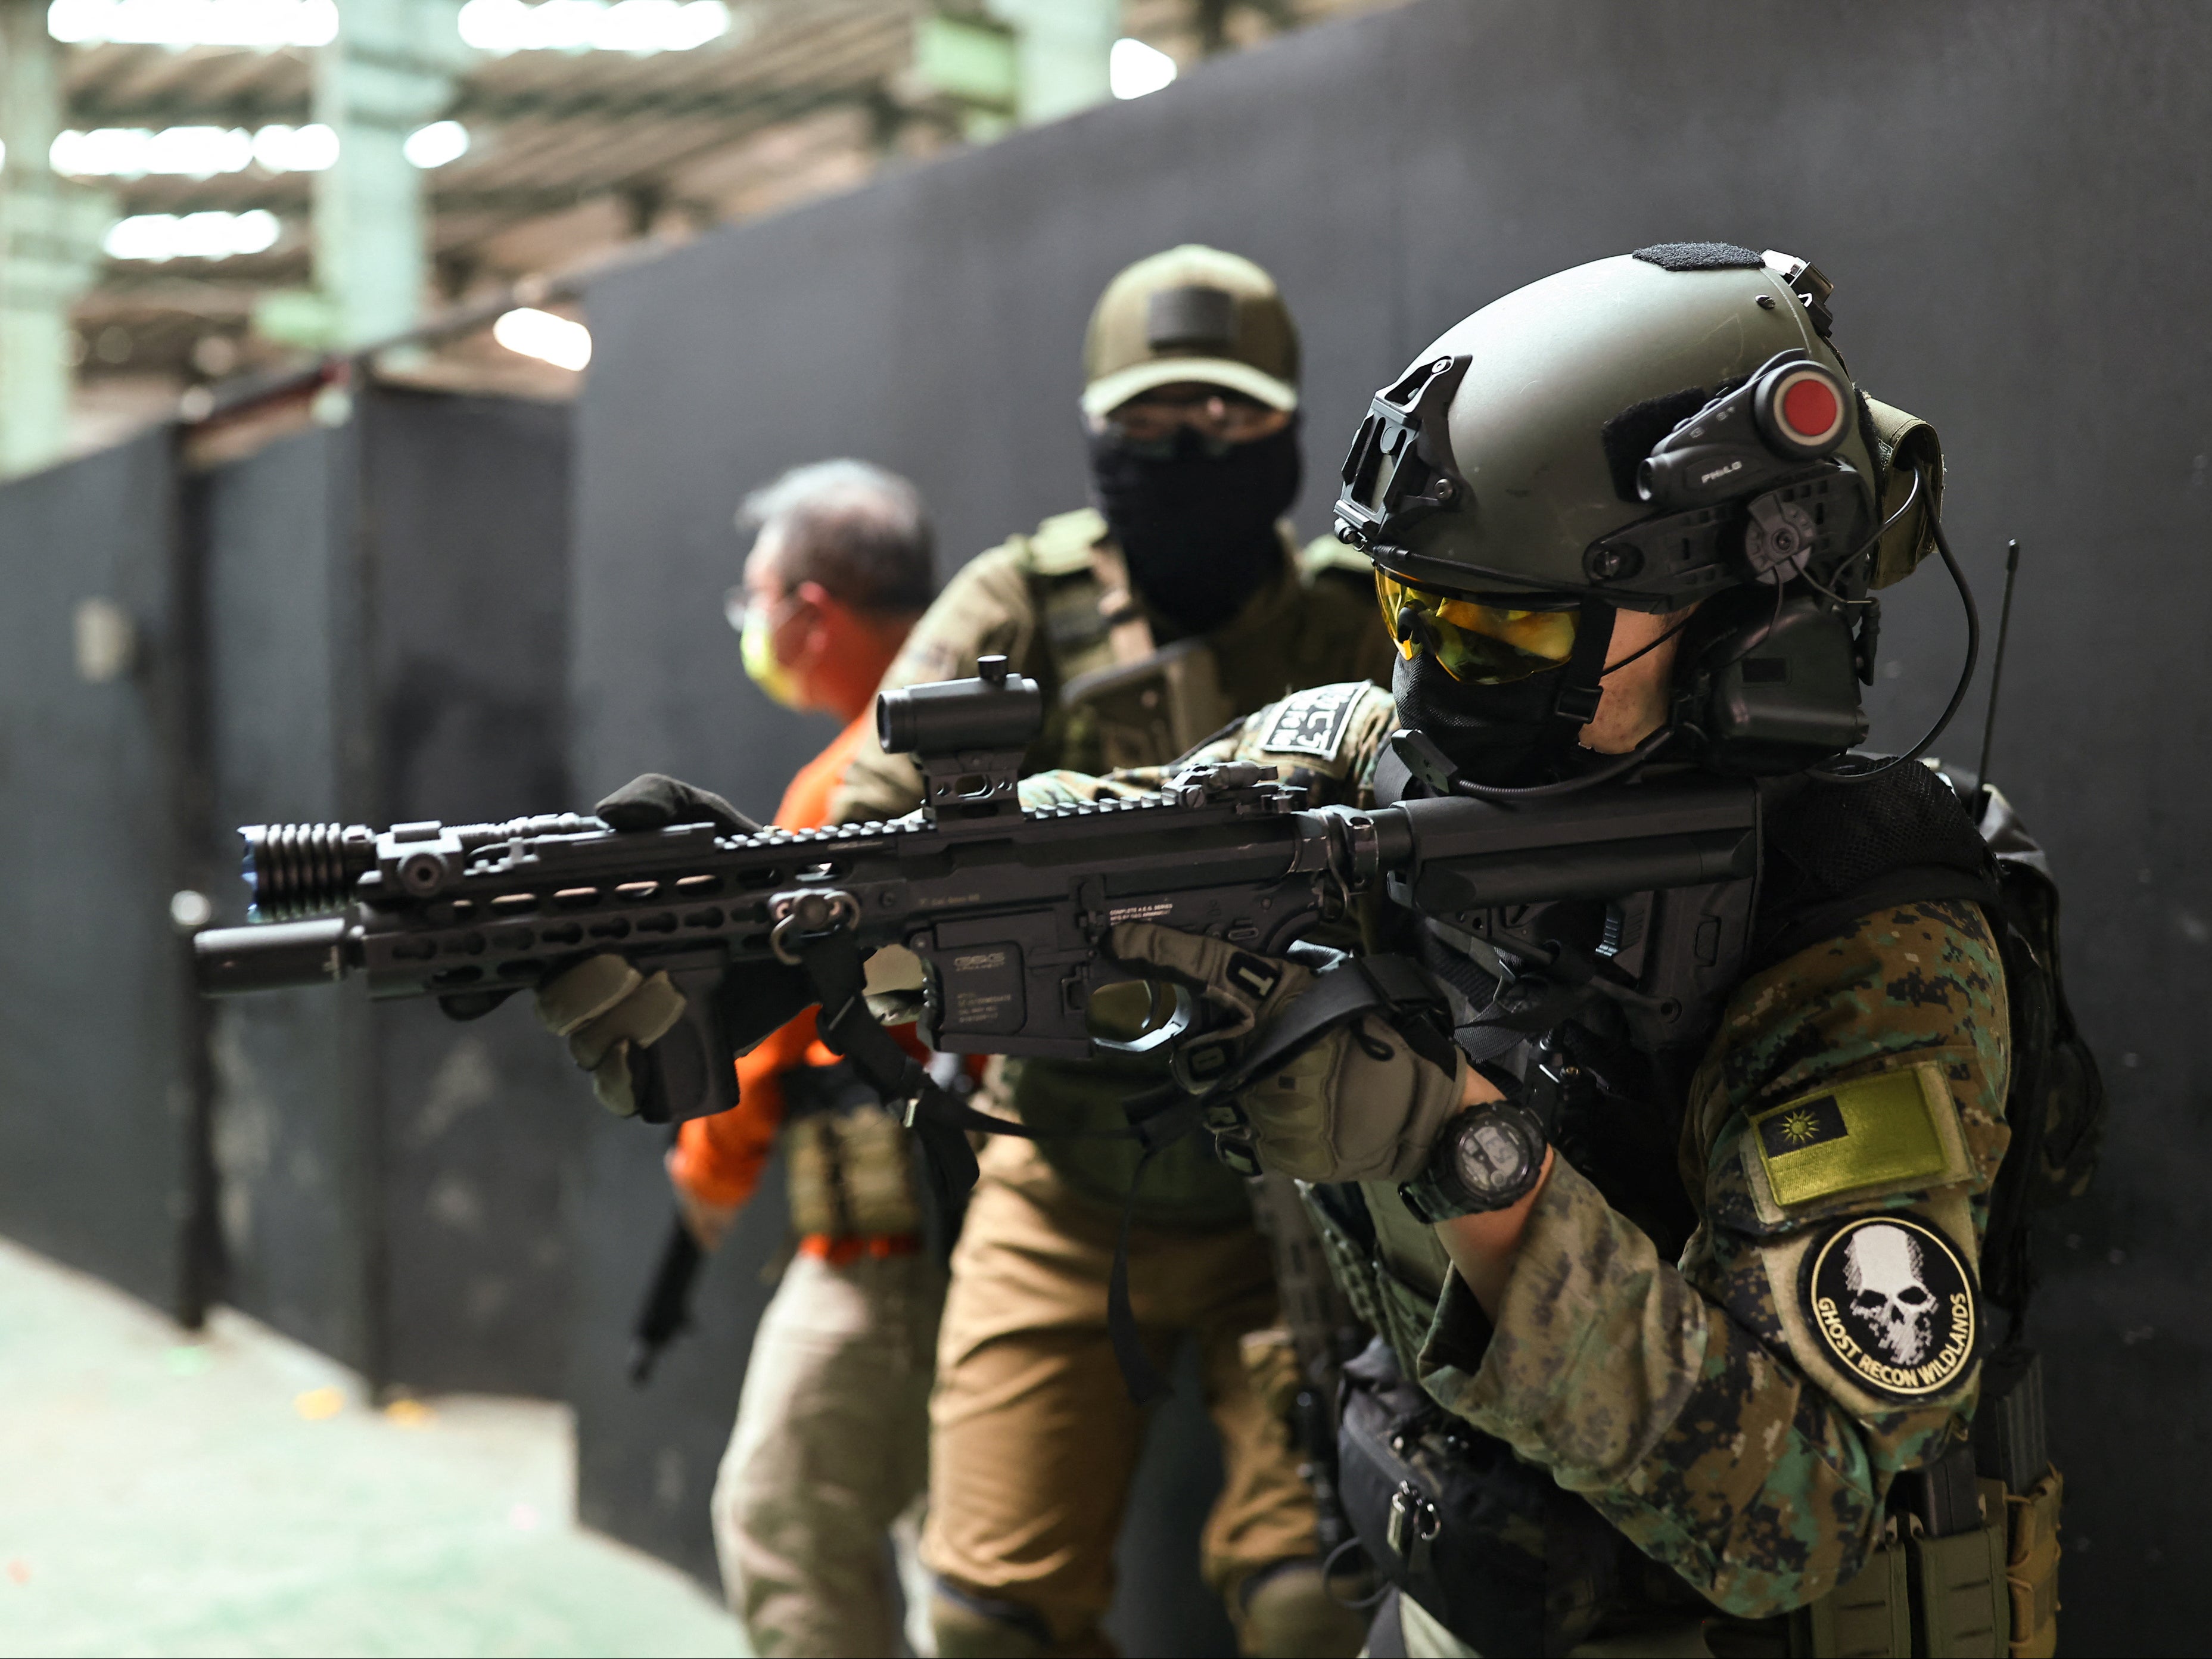 Trainees prepare to enter a building with their airsoft guns during a shooting lesson